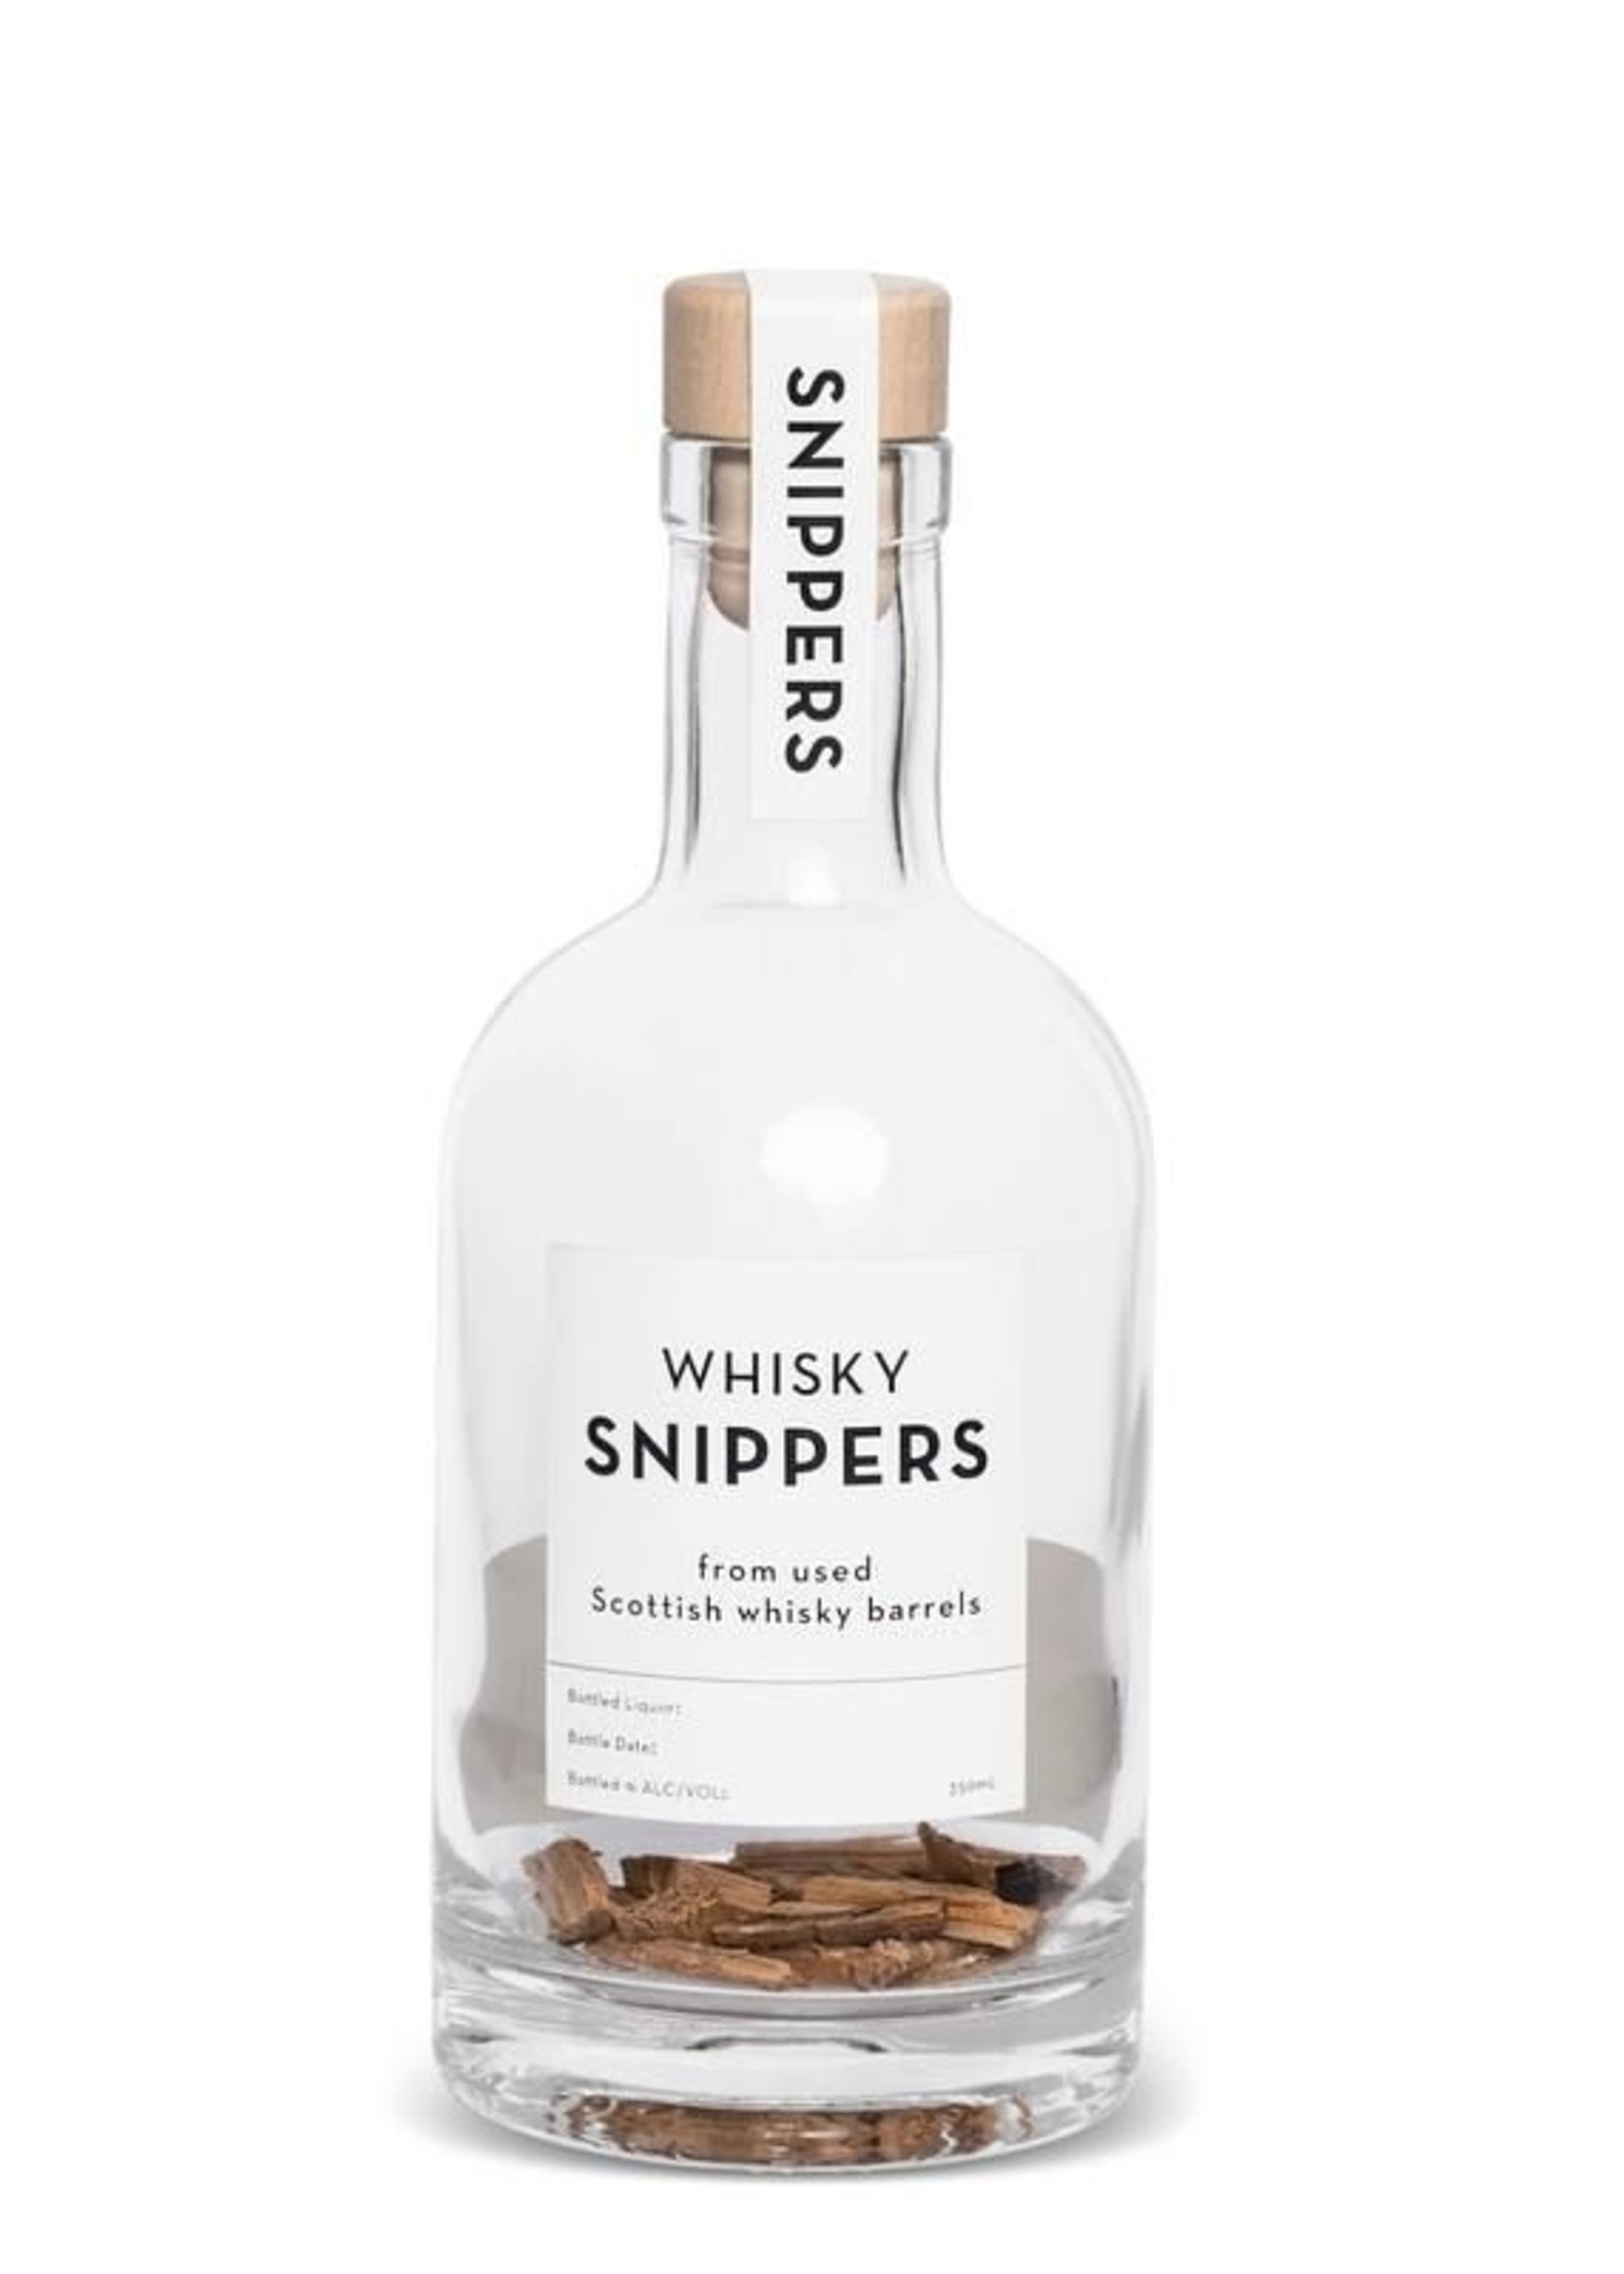 Snippers Snippers - Whisky - 350ml